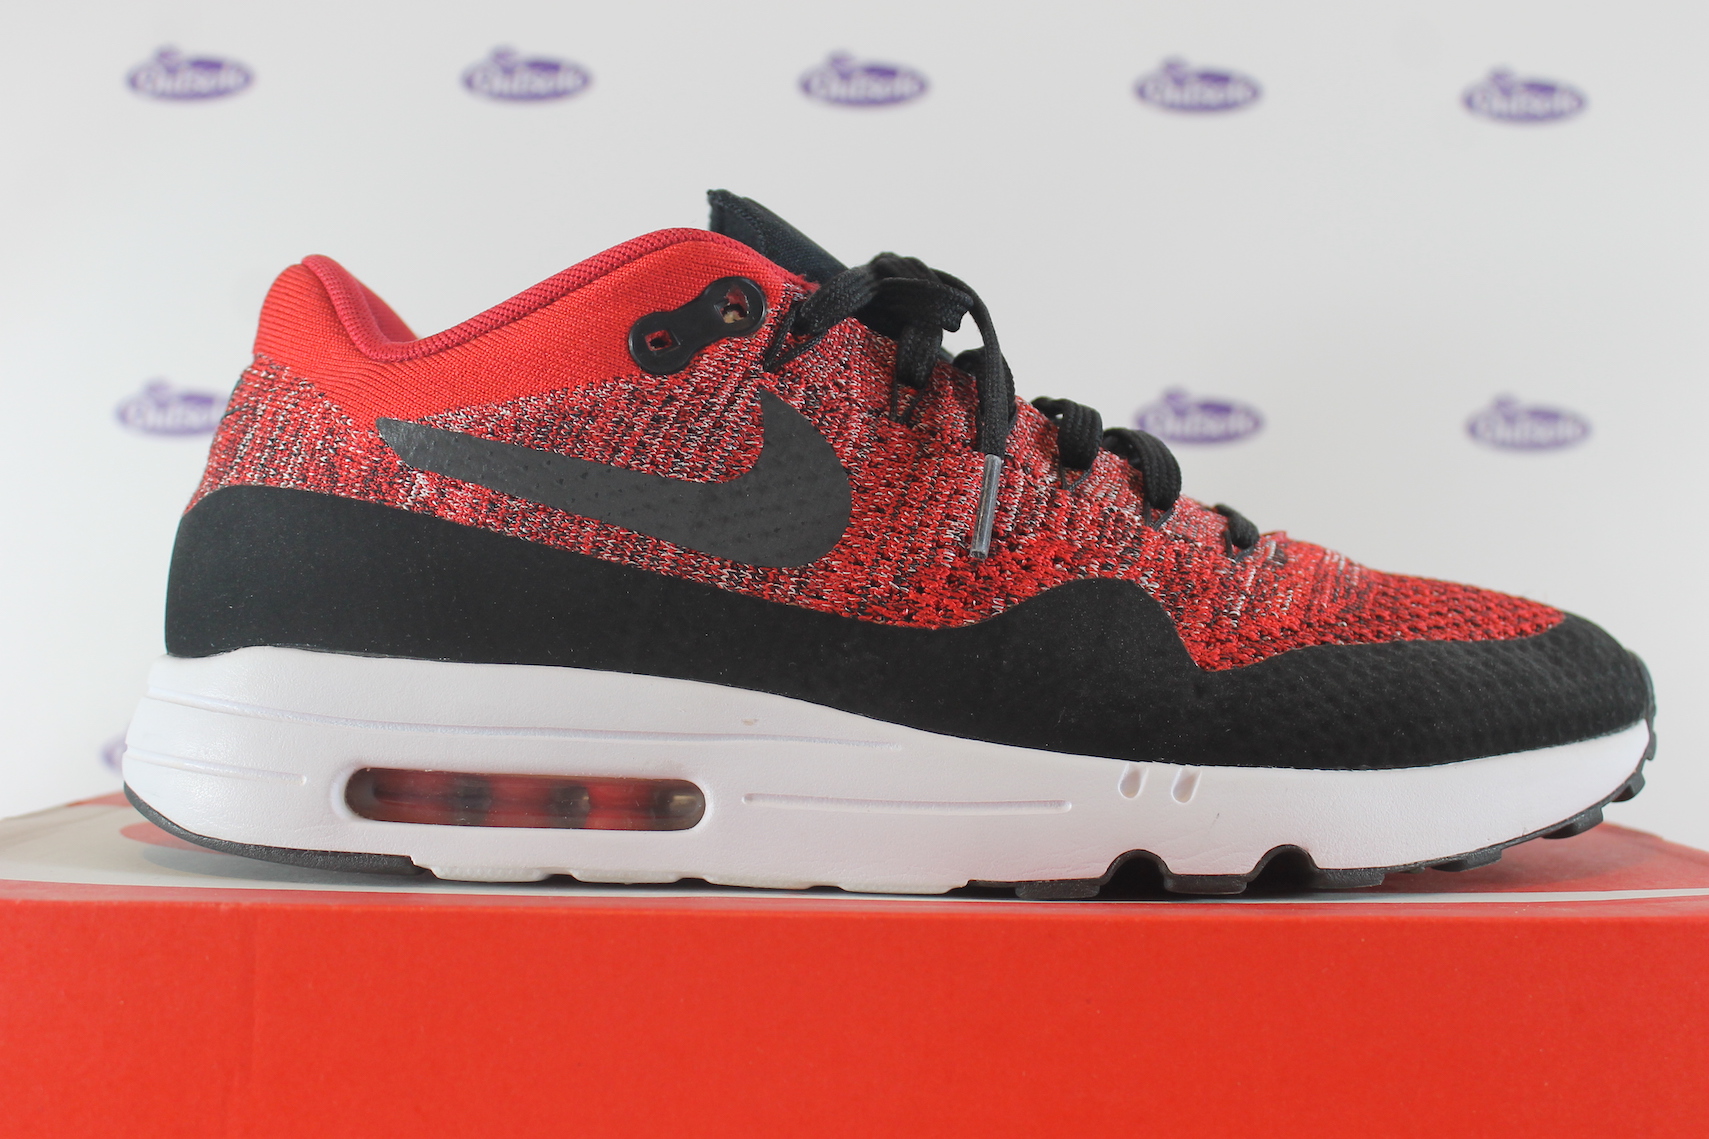 Desnudarse templado Atrevimiento Nike Air Max 1 Flyknit Black Red • ✓ In stock at Outsole